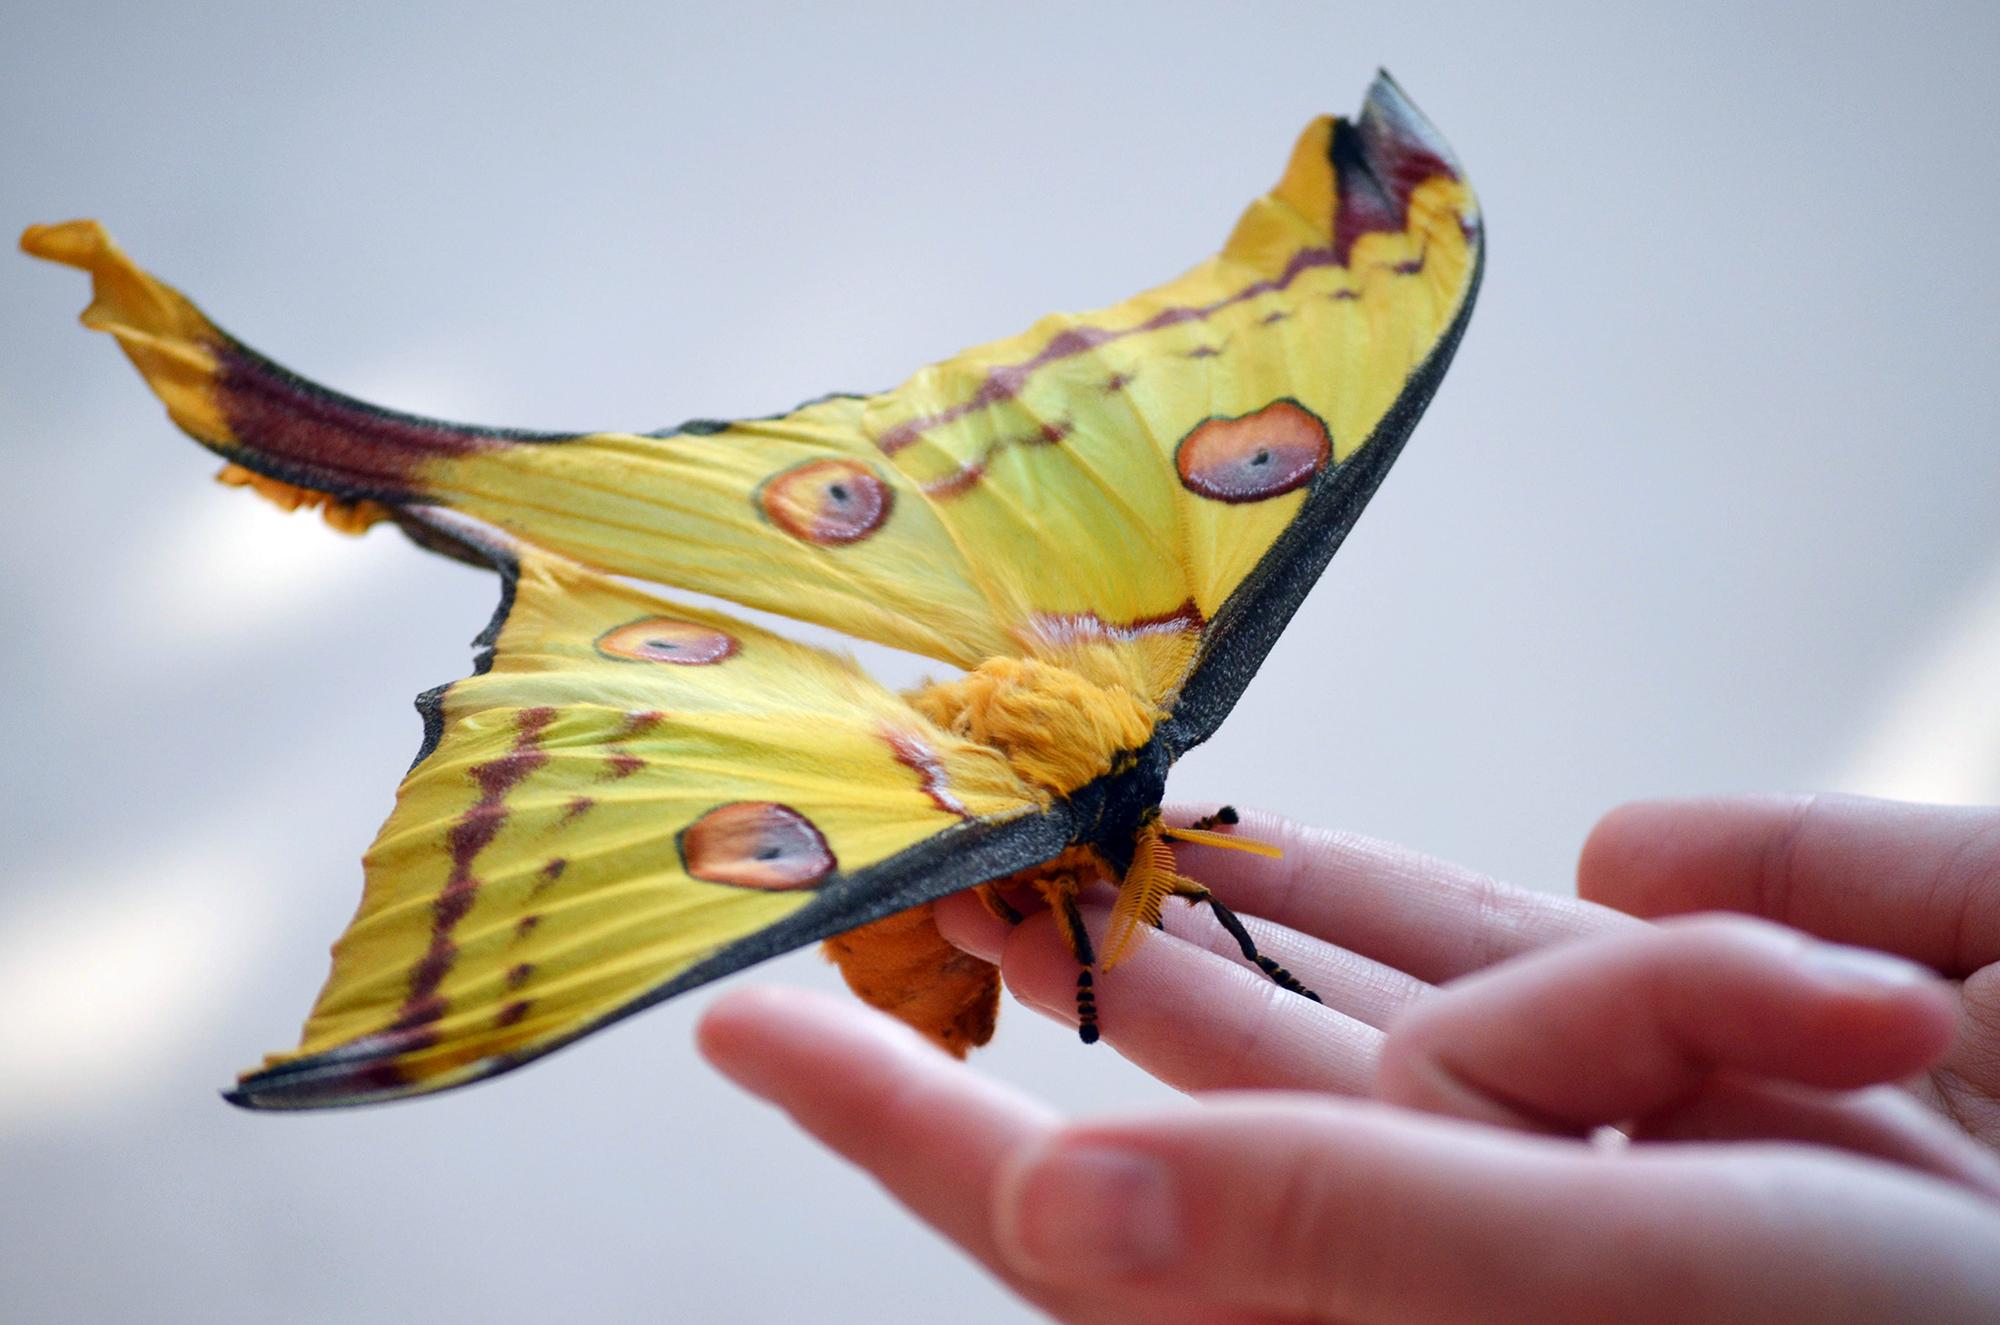 Rare Comet Moth Emerges From Cocoon at Notebaert Nature Museum ...